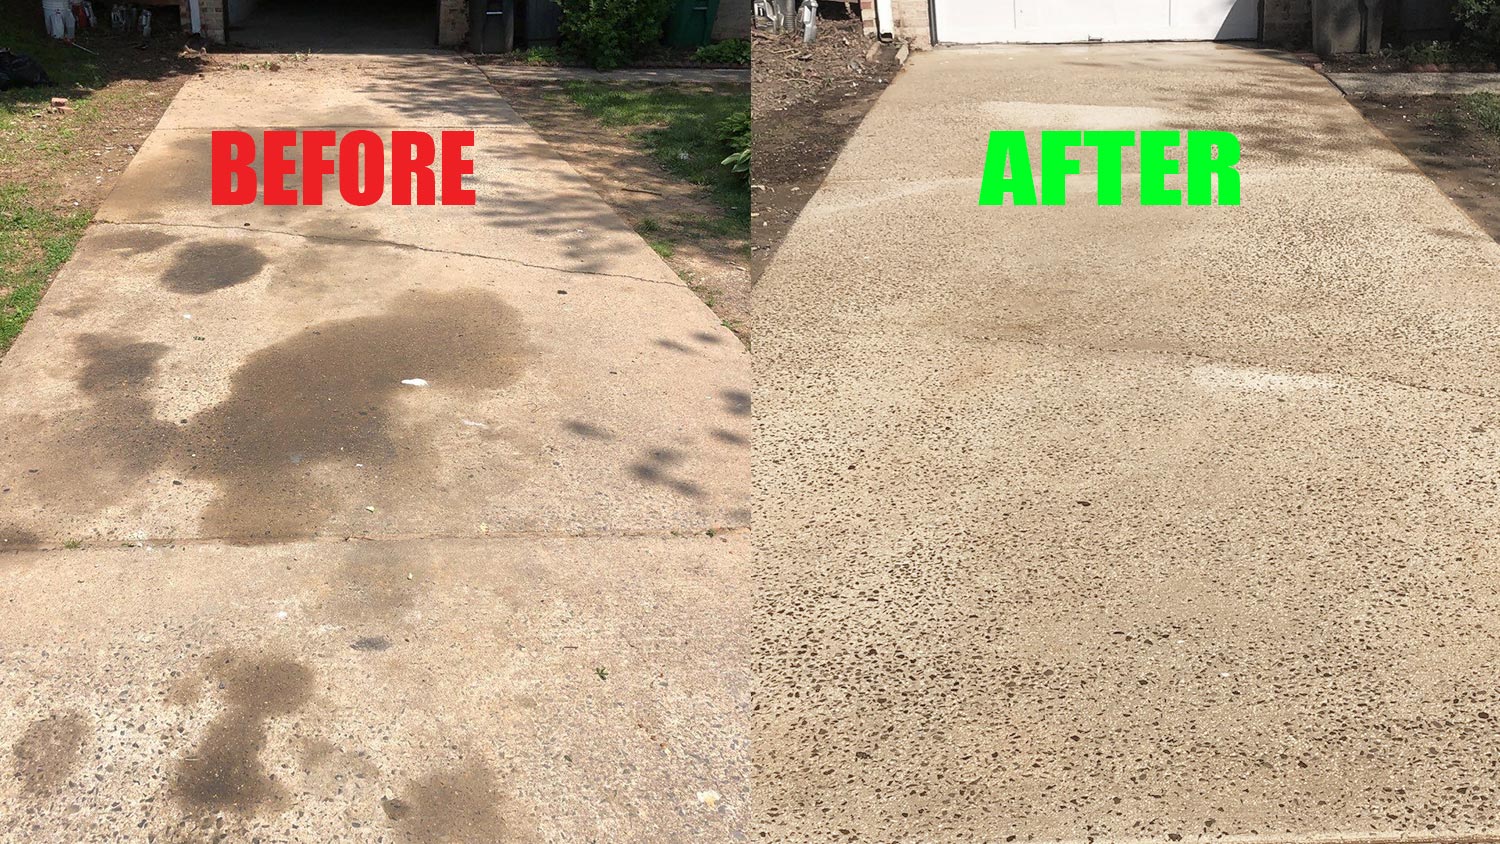 Nastee 1 Gallon - Remove oil stain from concrete - Industrial Degreaser-image_2